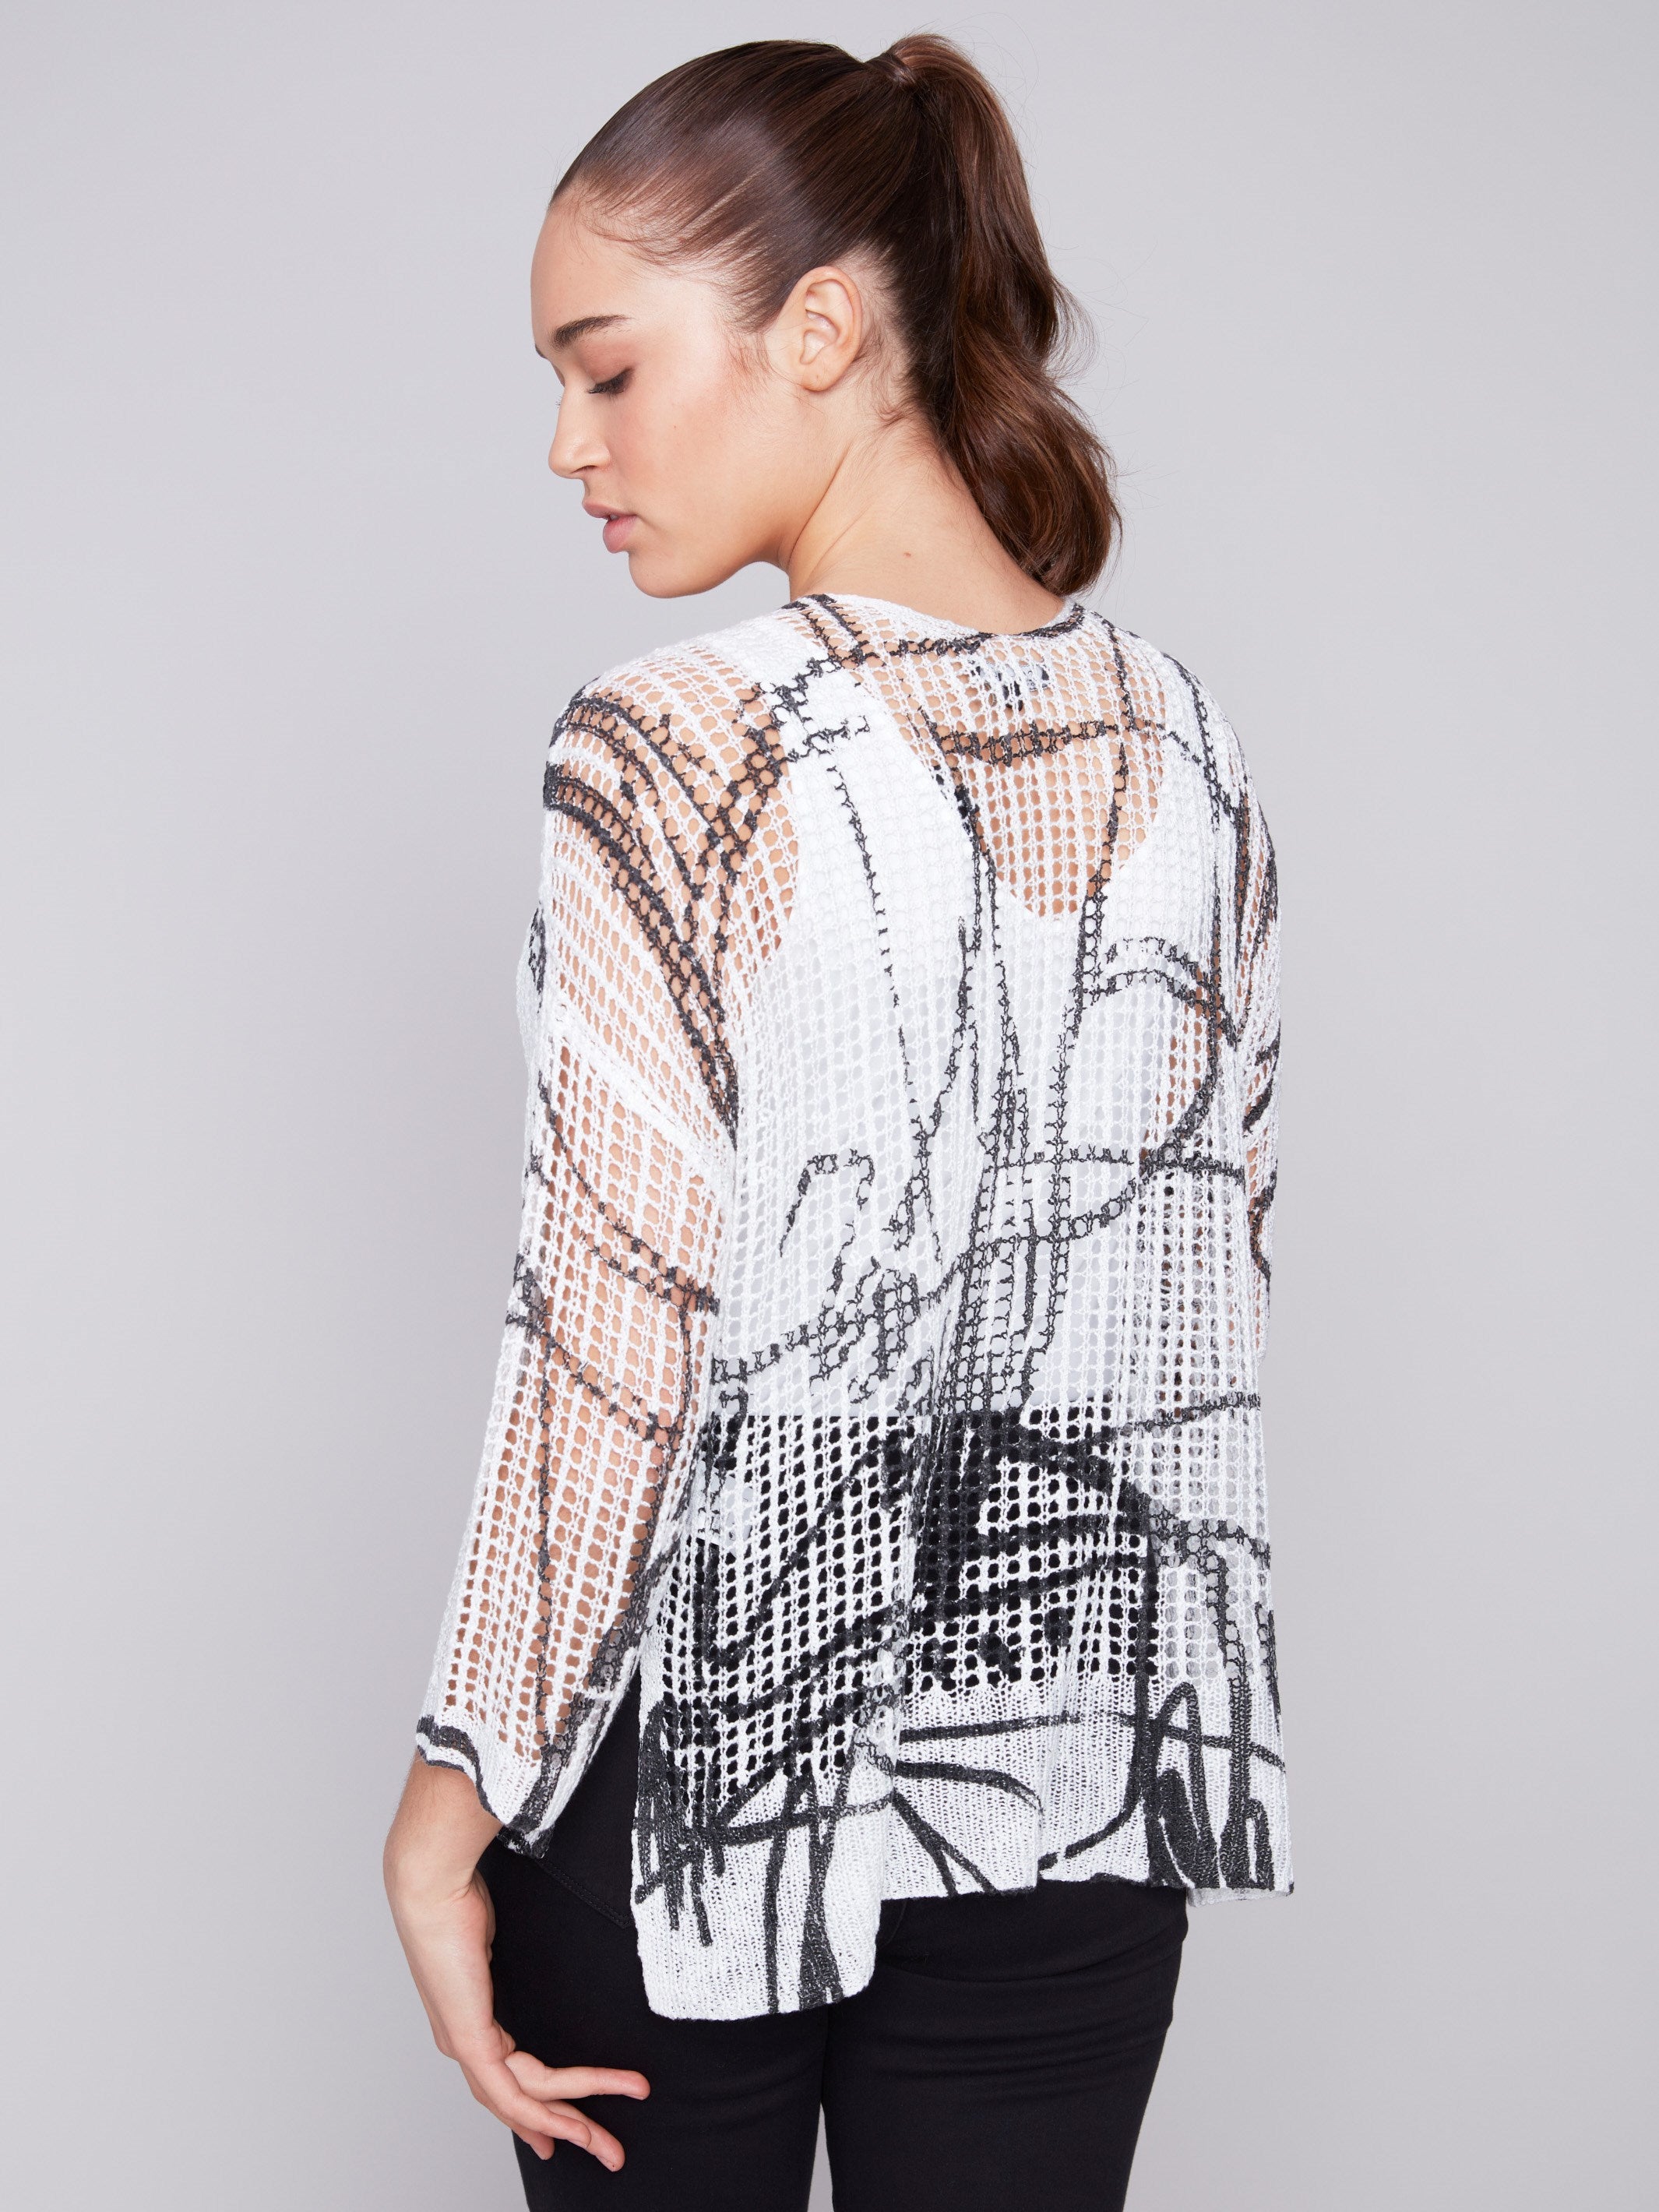 Printed Fishnet Crochet Sweater - Pepper - Charlie B Collection Canada - Image 2